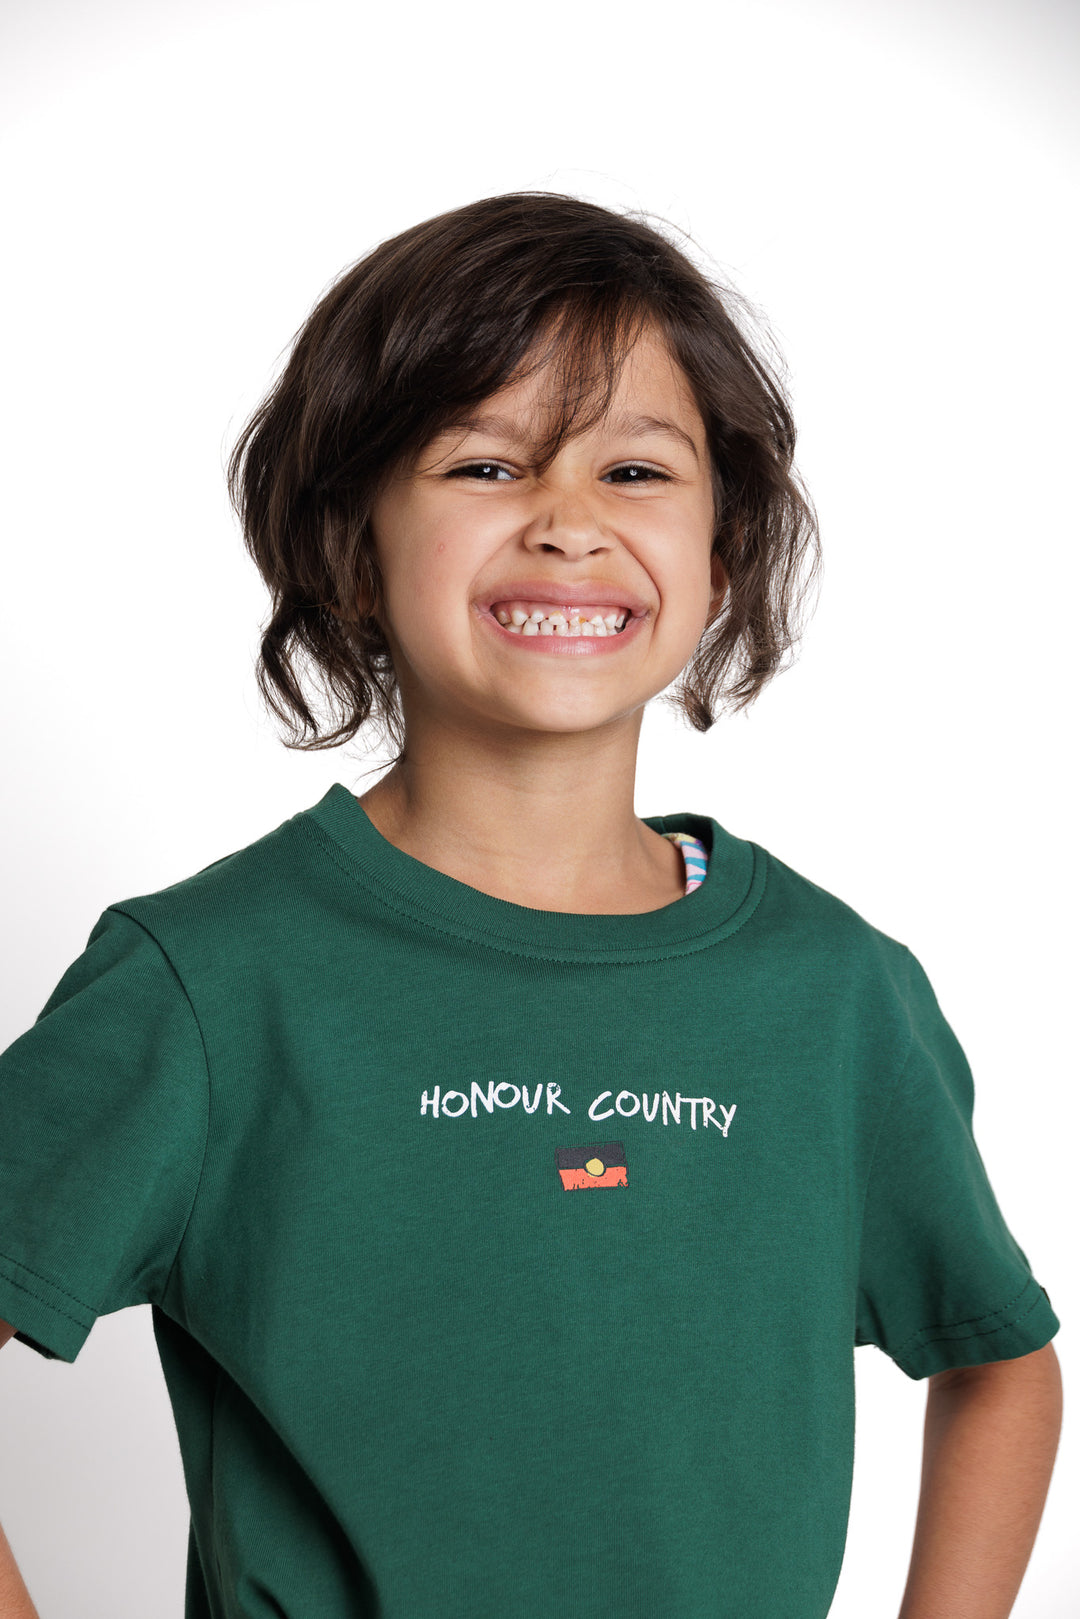 Clothing The Gaps. Kids Handwritten Honour Country Tee. Forrest green T-shirt with 'Honour Country' across chest in handwritten white text and coloured Aboriginal flag small underneath. On Back of tee white hand-writen style text 'Honour and respect Aboriginal and Torres Strait Islander people as the rightful custodians of country.' Circling 'respect' underlining 'custodians' and highlighting 'rightful' in a black colour. Outlined 'bunjil' eagle in bottom right corner.'        